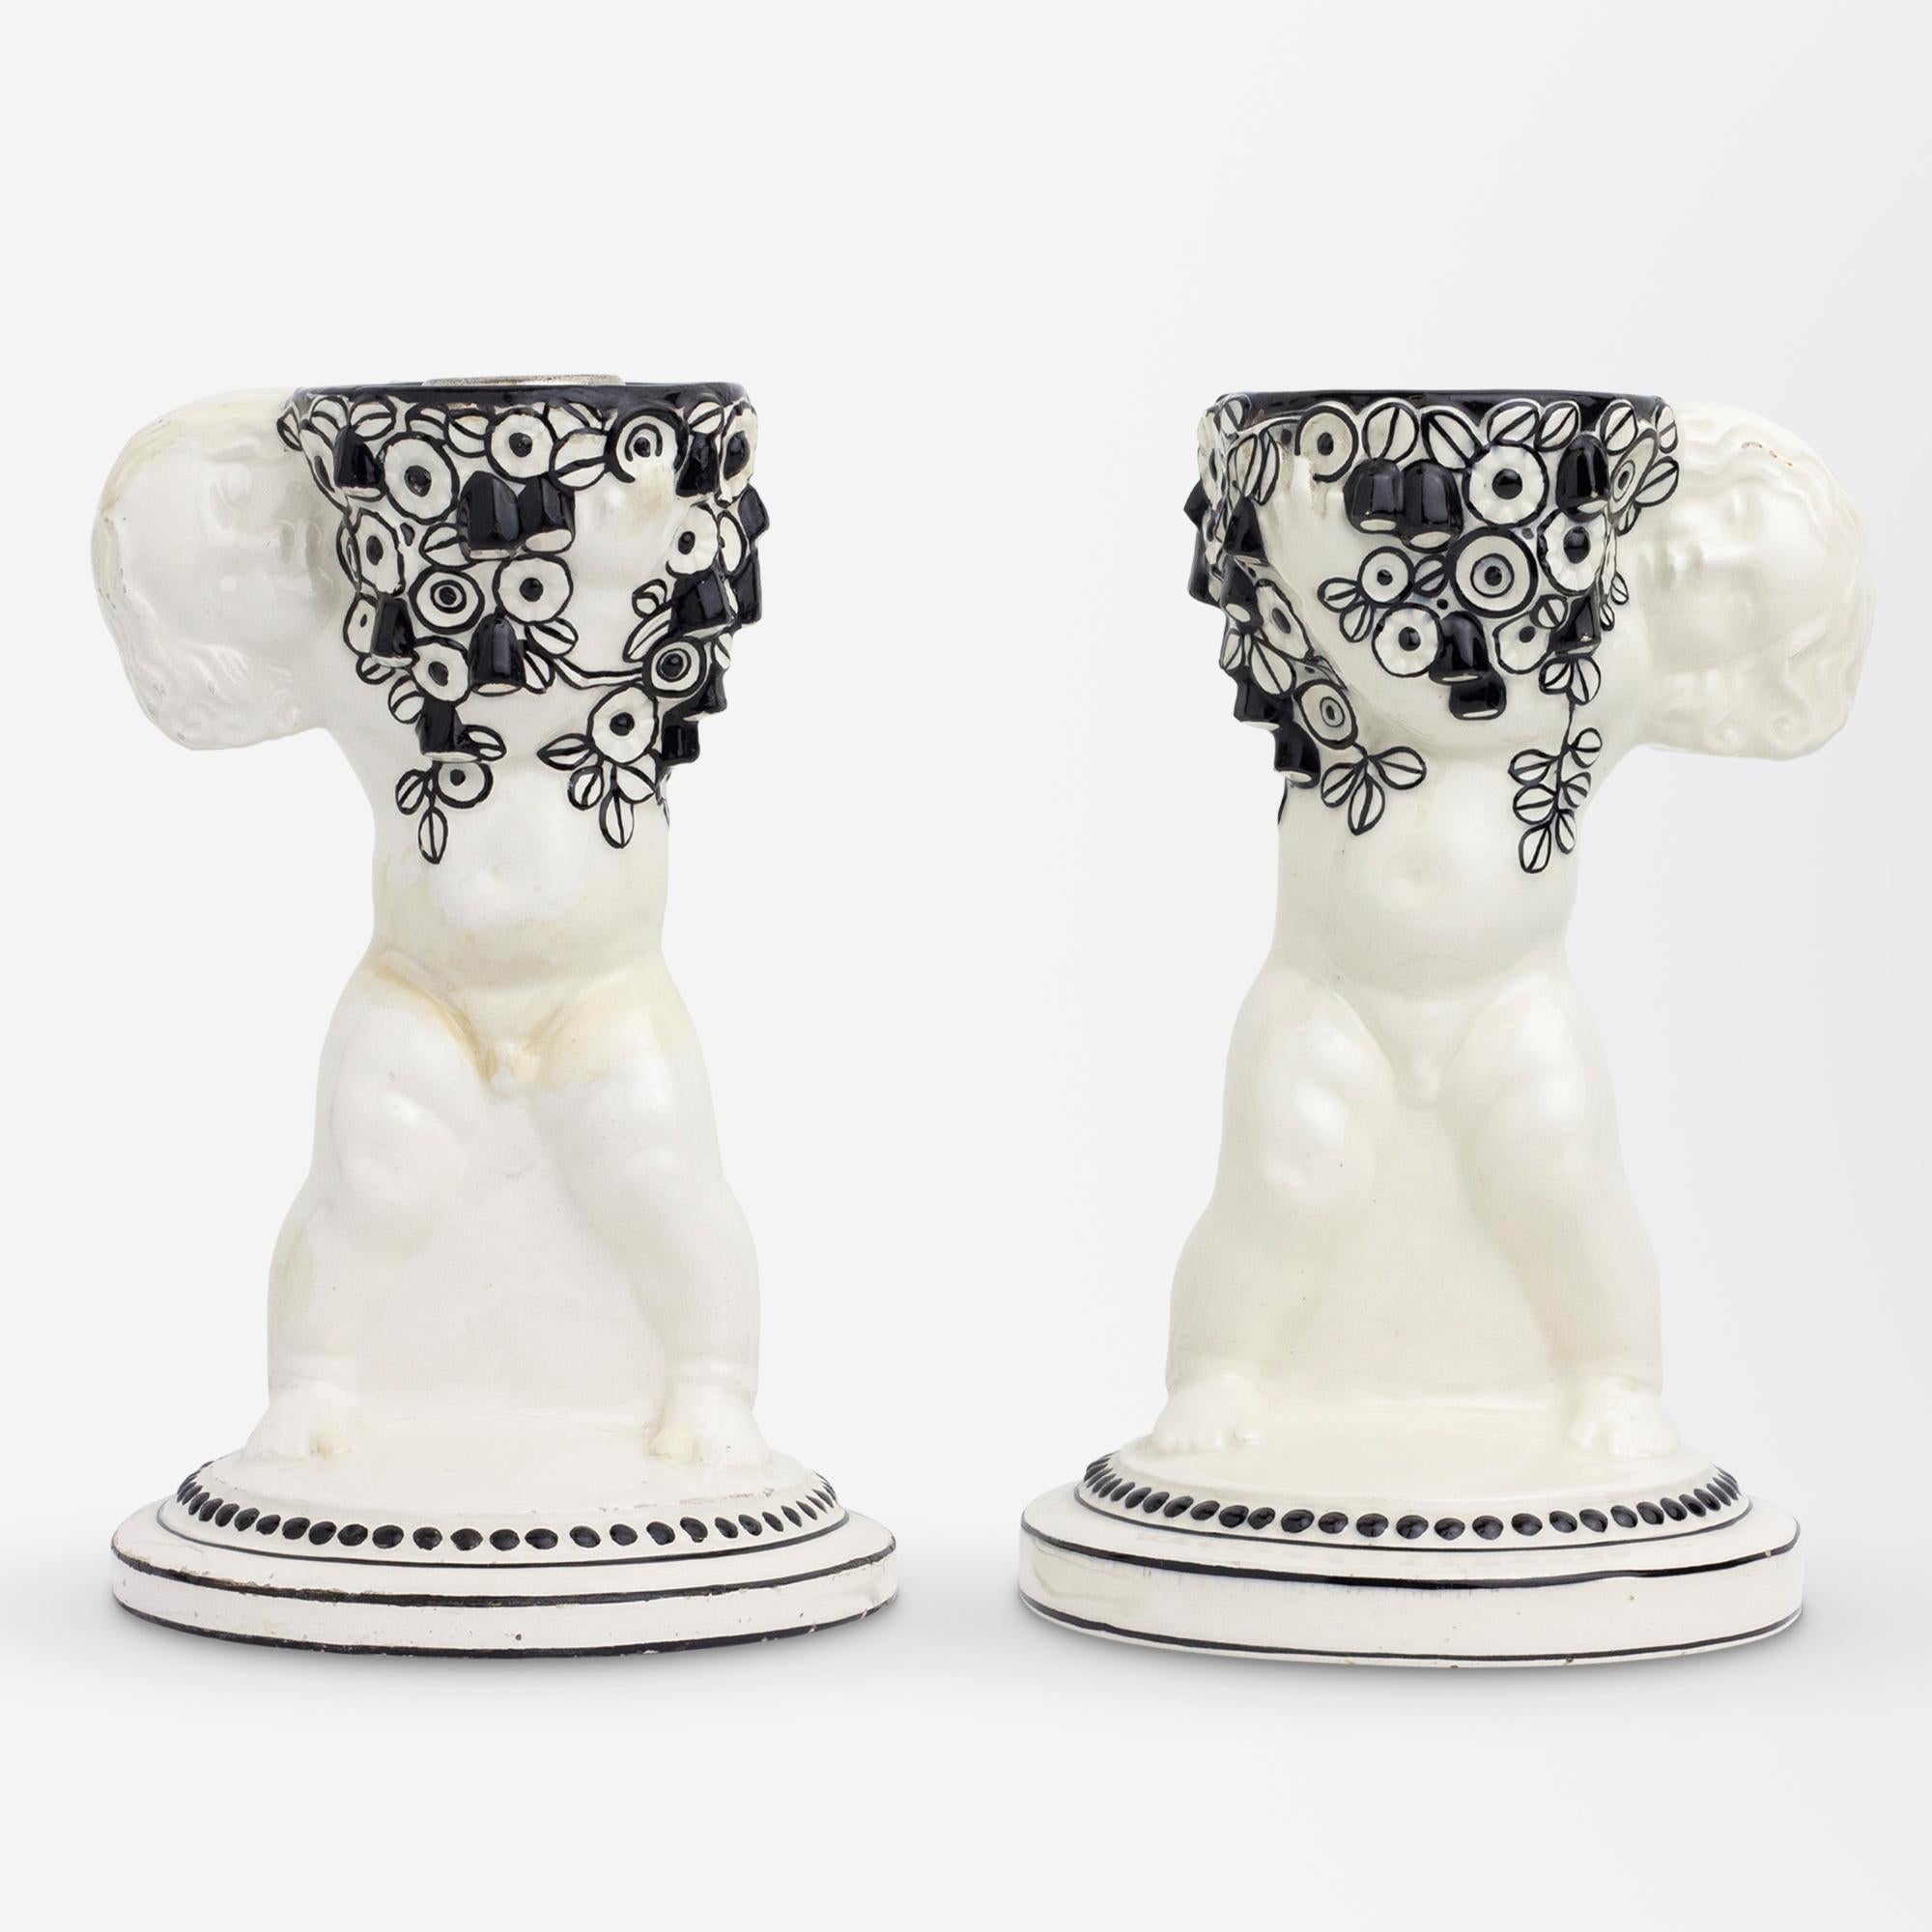 A pair of Vienna Secession ceramic candle holders in the form of putti holding flowers by Michael Powolny for Weiner Keramik in his signature stark black and white, circa 1907. These candlesticks have become a pair at some stage during their